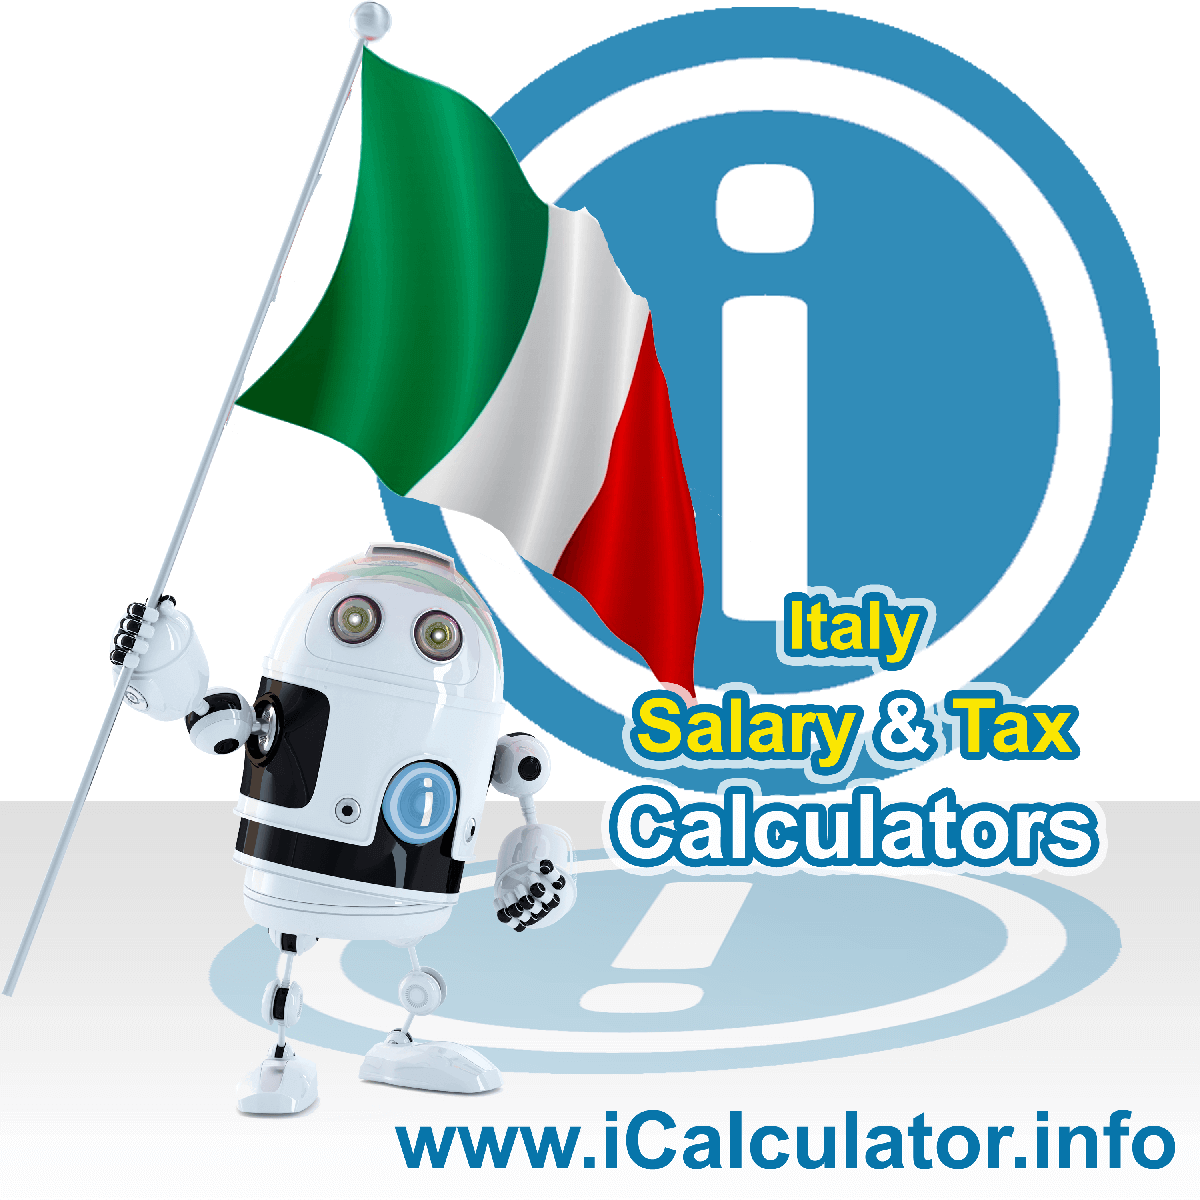 Italy Saalry Calculator. This image shows the Italy flag and information relating to the tax calculation and instructins for using the Italy Tax Calculator for national, regional and municipal payroll calculations in Italy